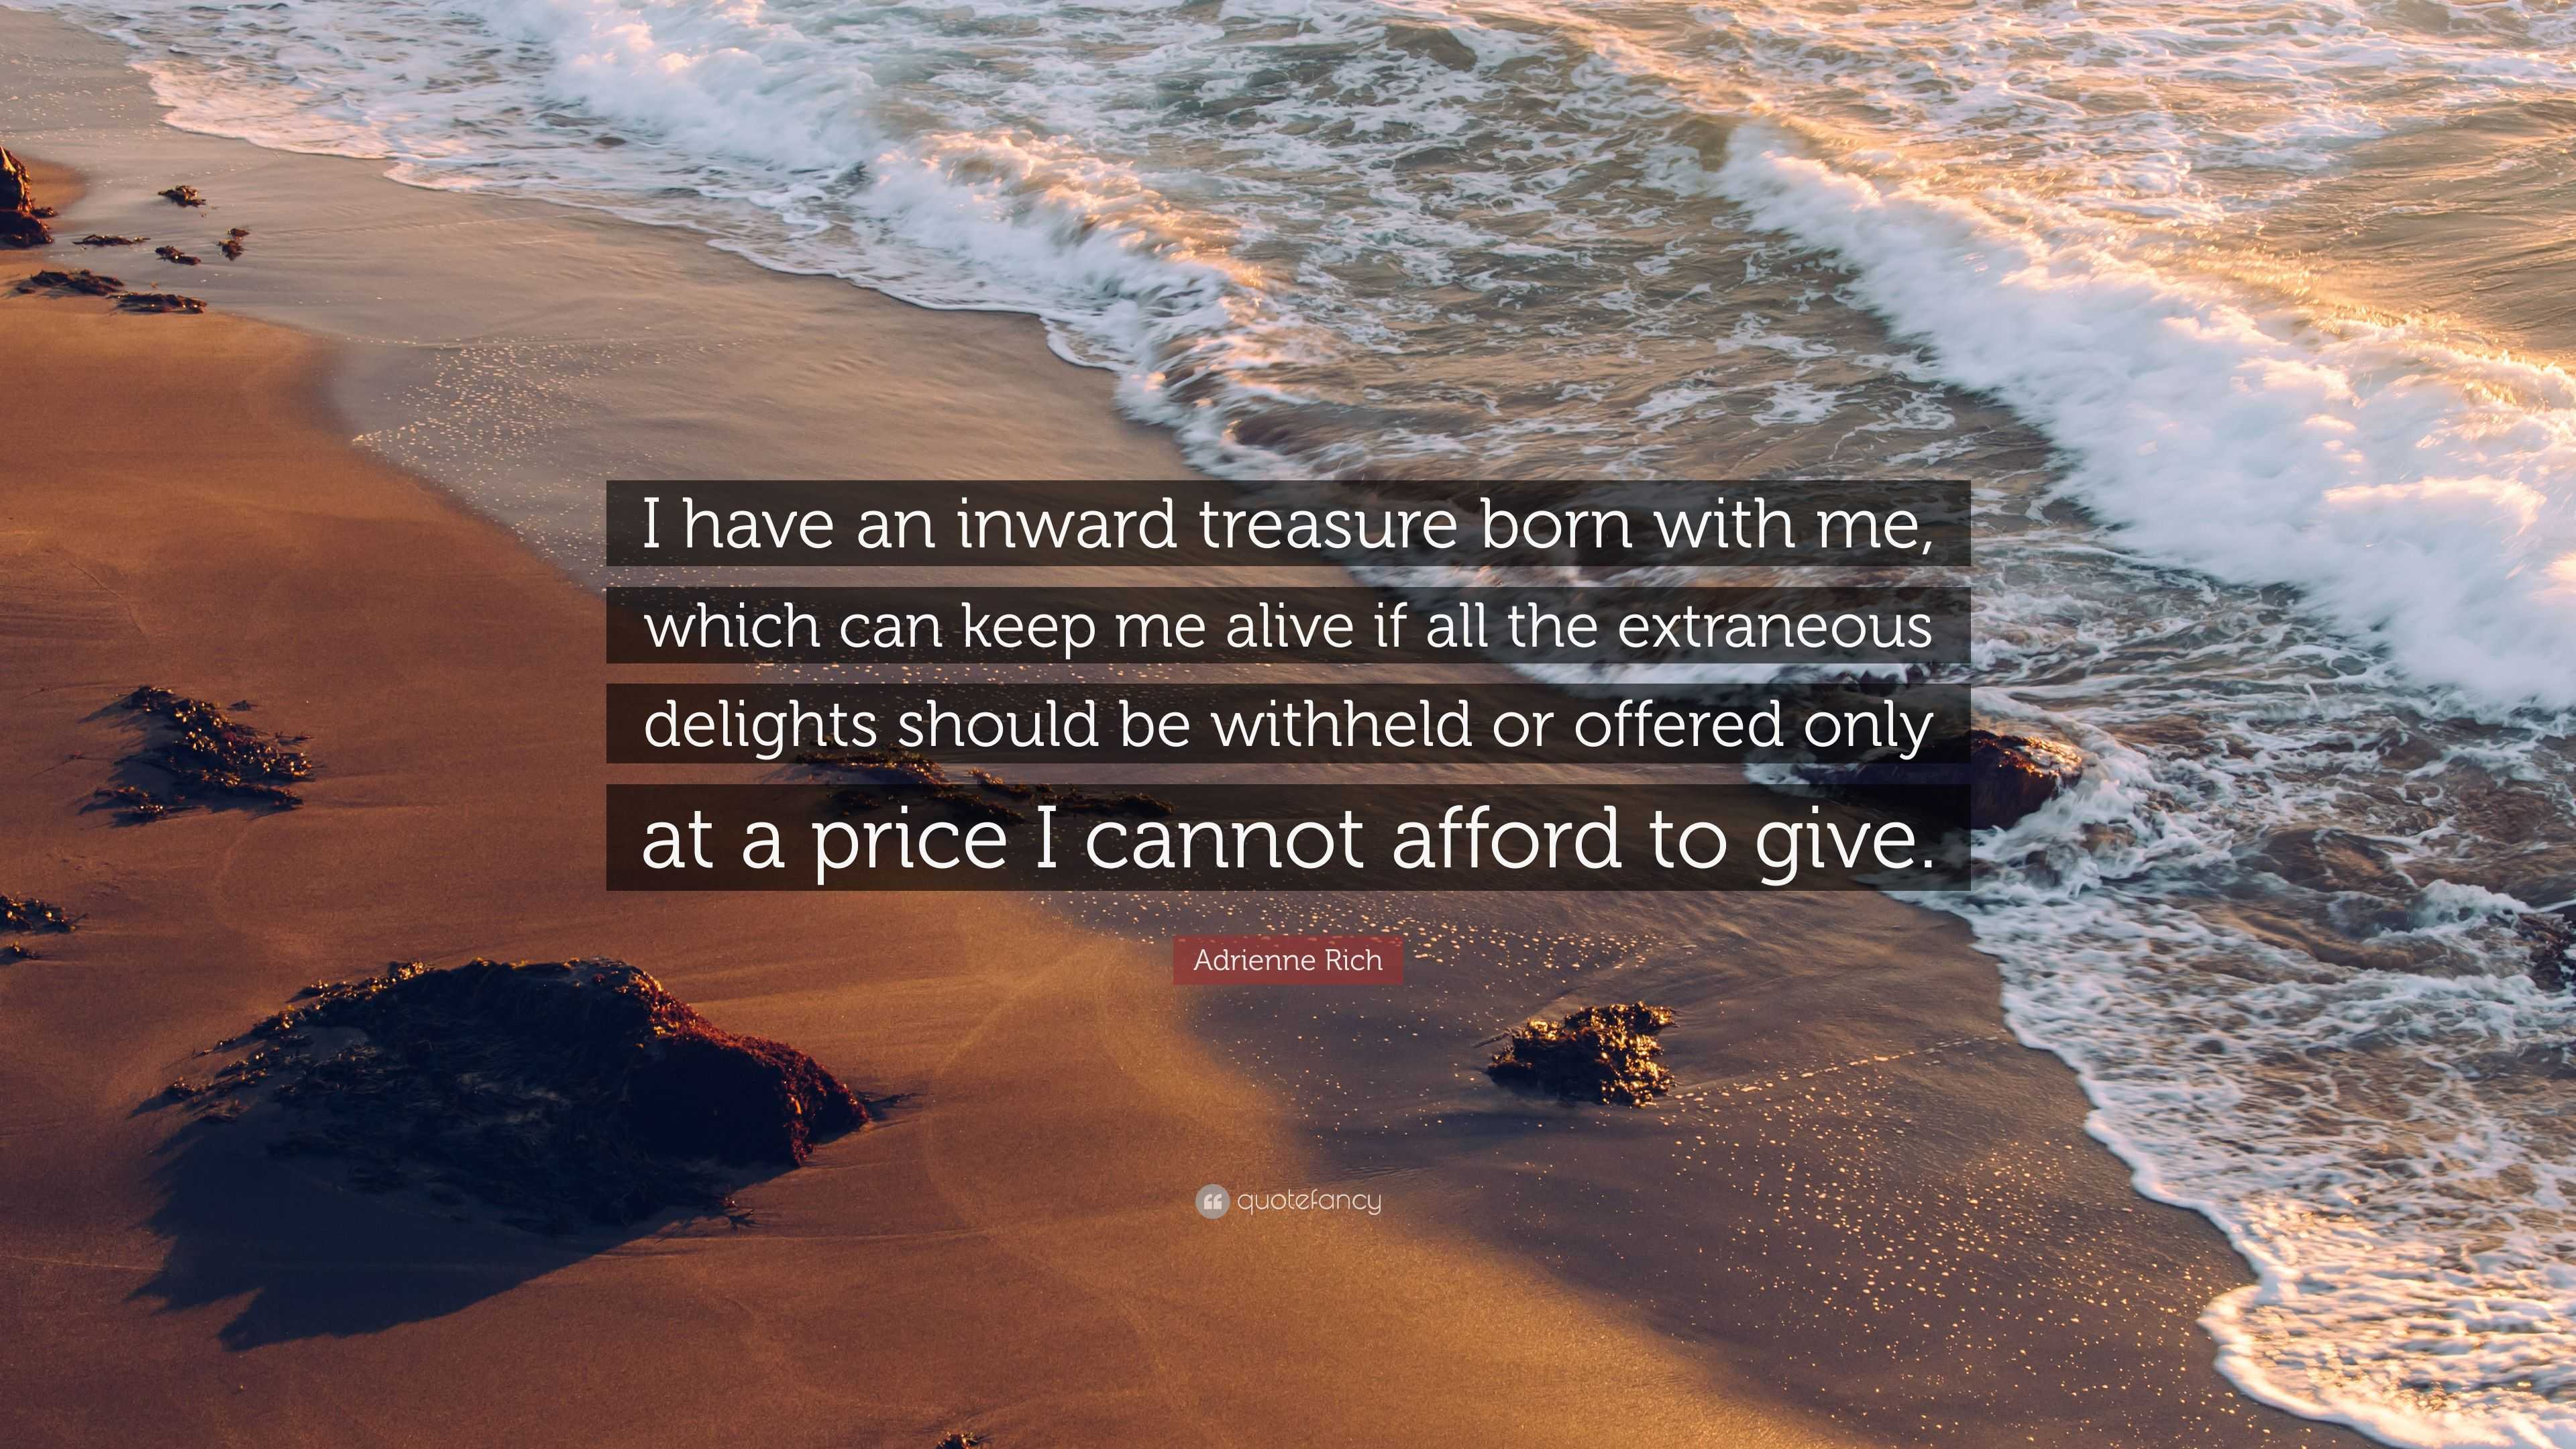 Adrienne Rich Quote: “I have an inward treasure born with me, which can  keep me alive if all the extraneous delights should be withheld or off...”